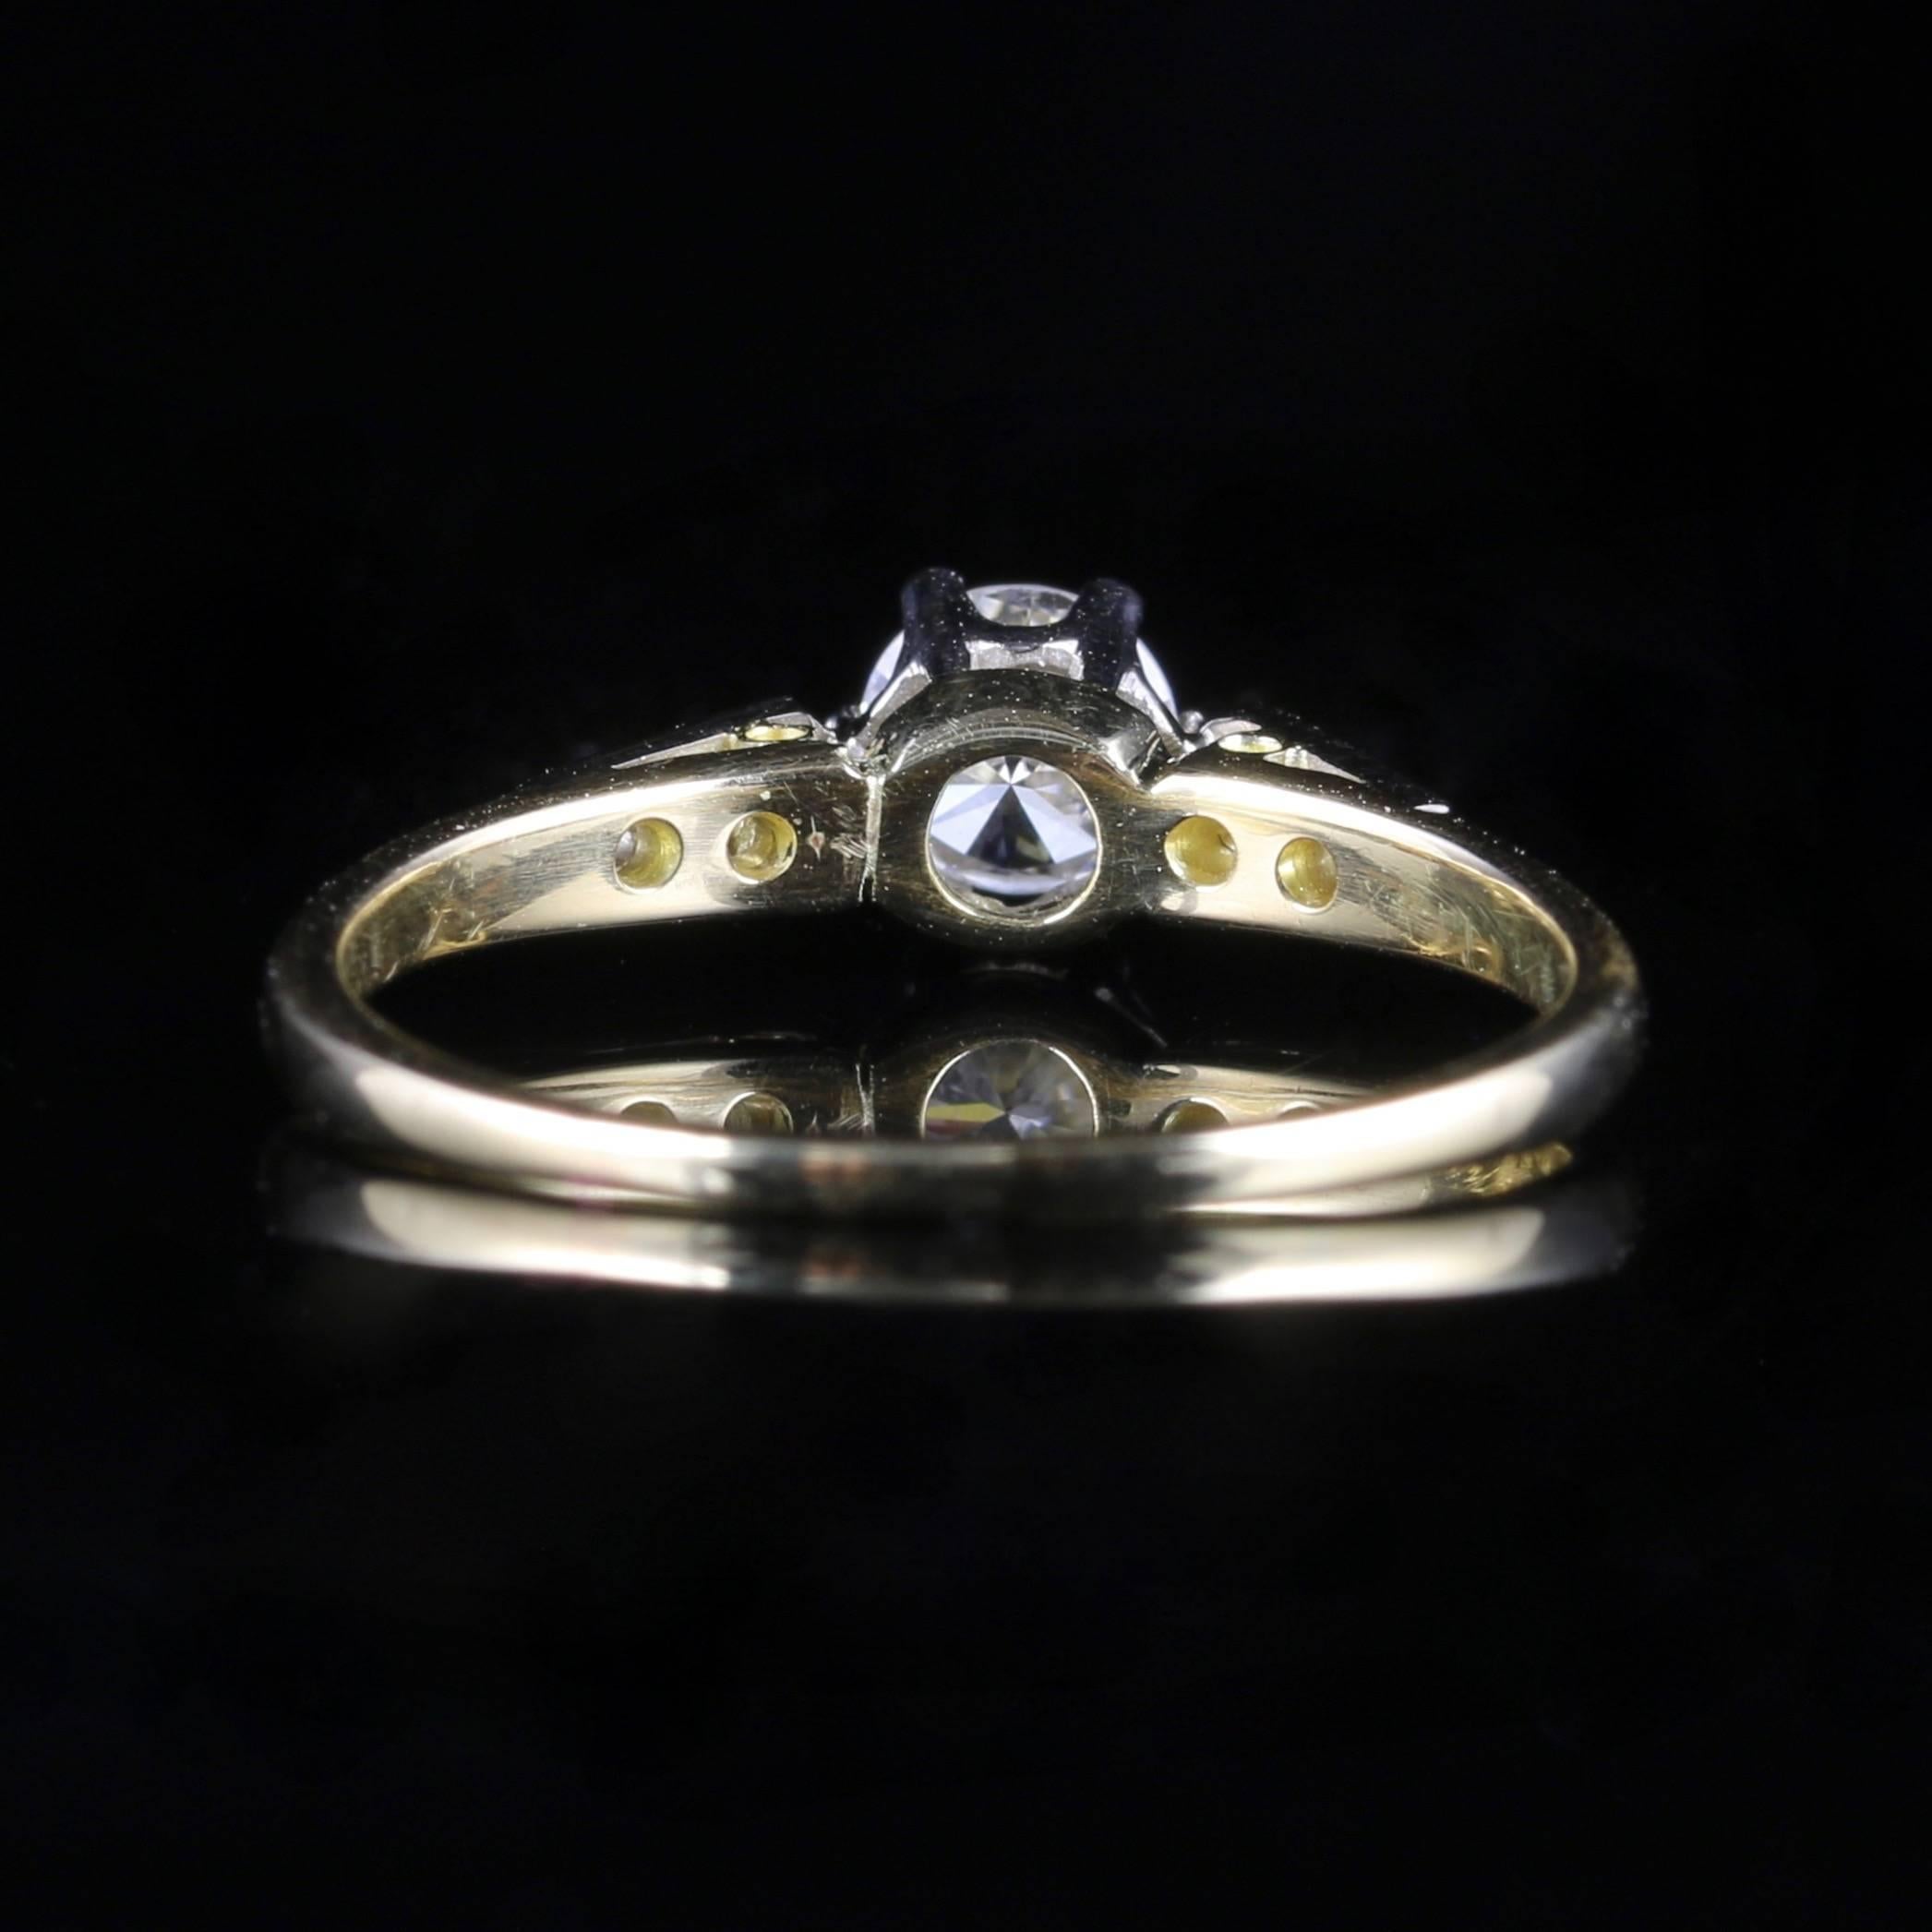 Antique Edwardian Diamond Ring 0.60 Carat Solitaire Engagement Ring circa 1915 In Excellent Condition In Lancaster, Lancashire